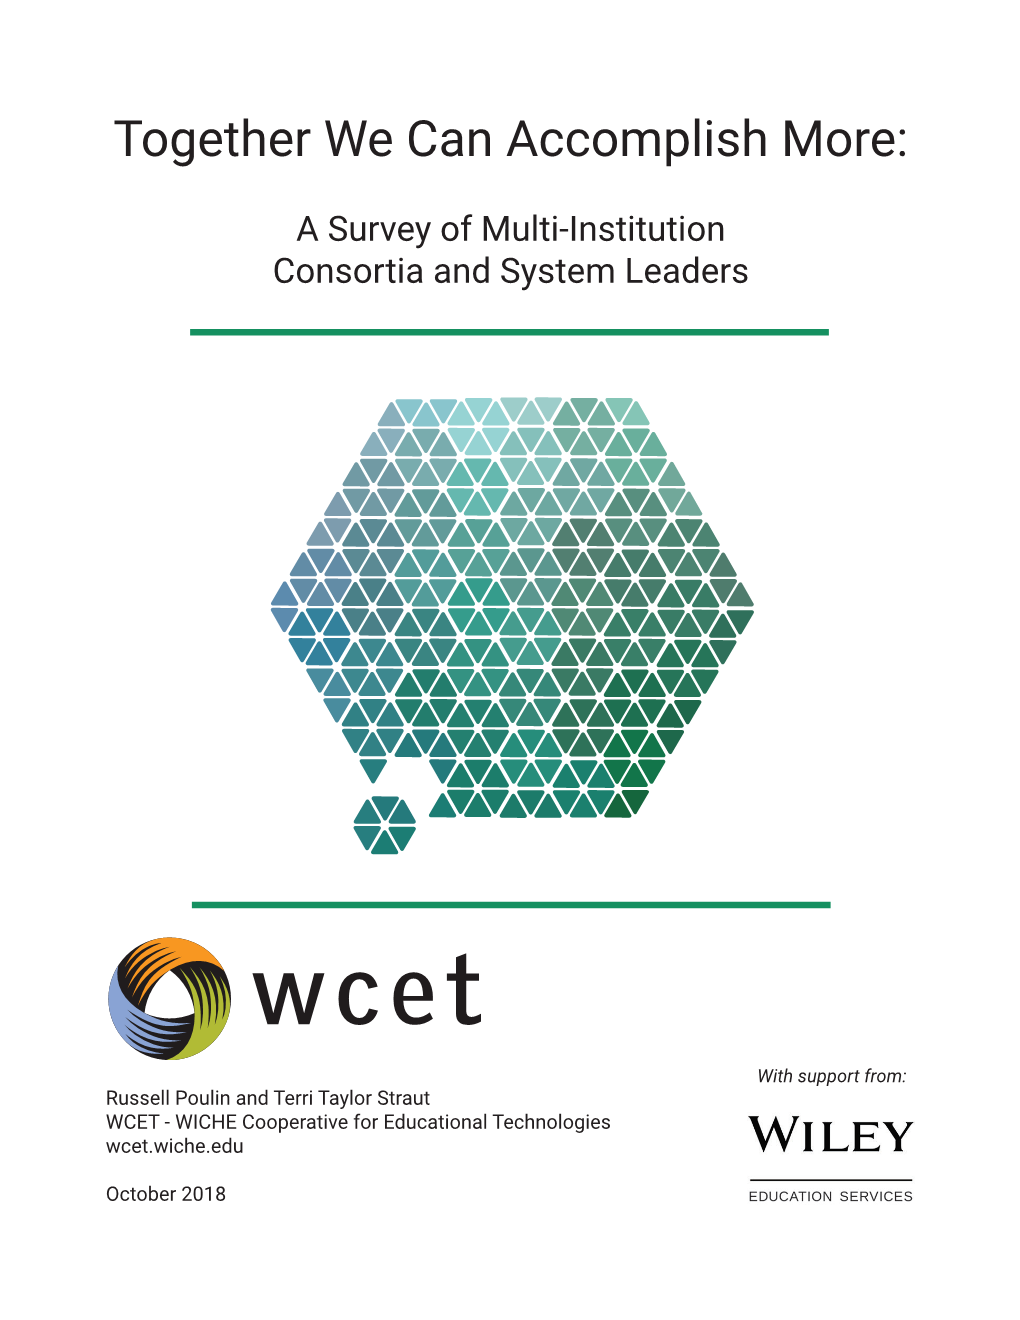 Together We Can Accomplish More: a Survey of Multi-Institution Consortia and System Leaders.”